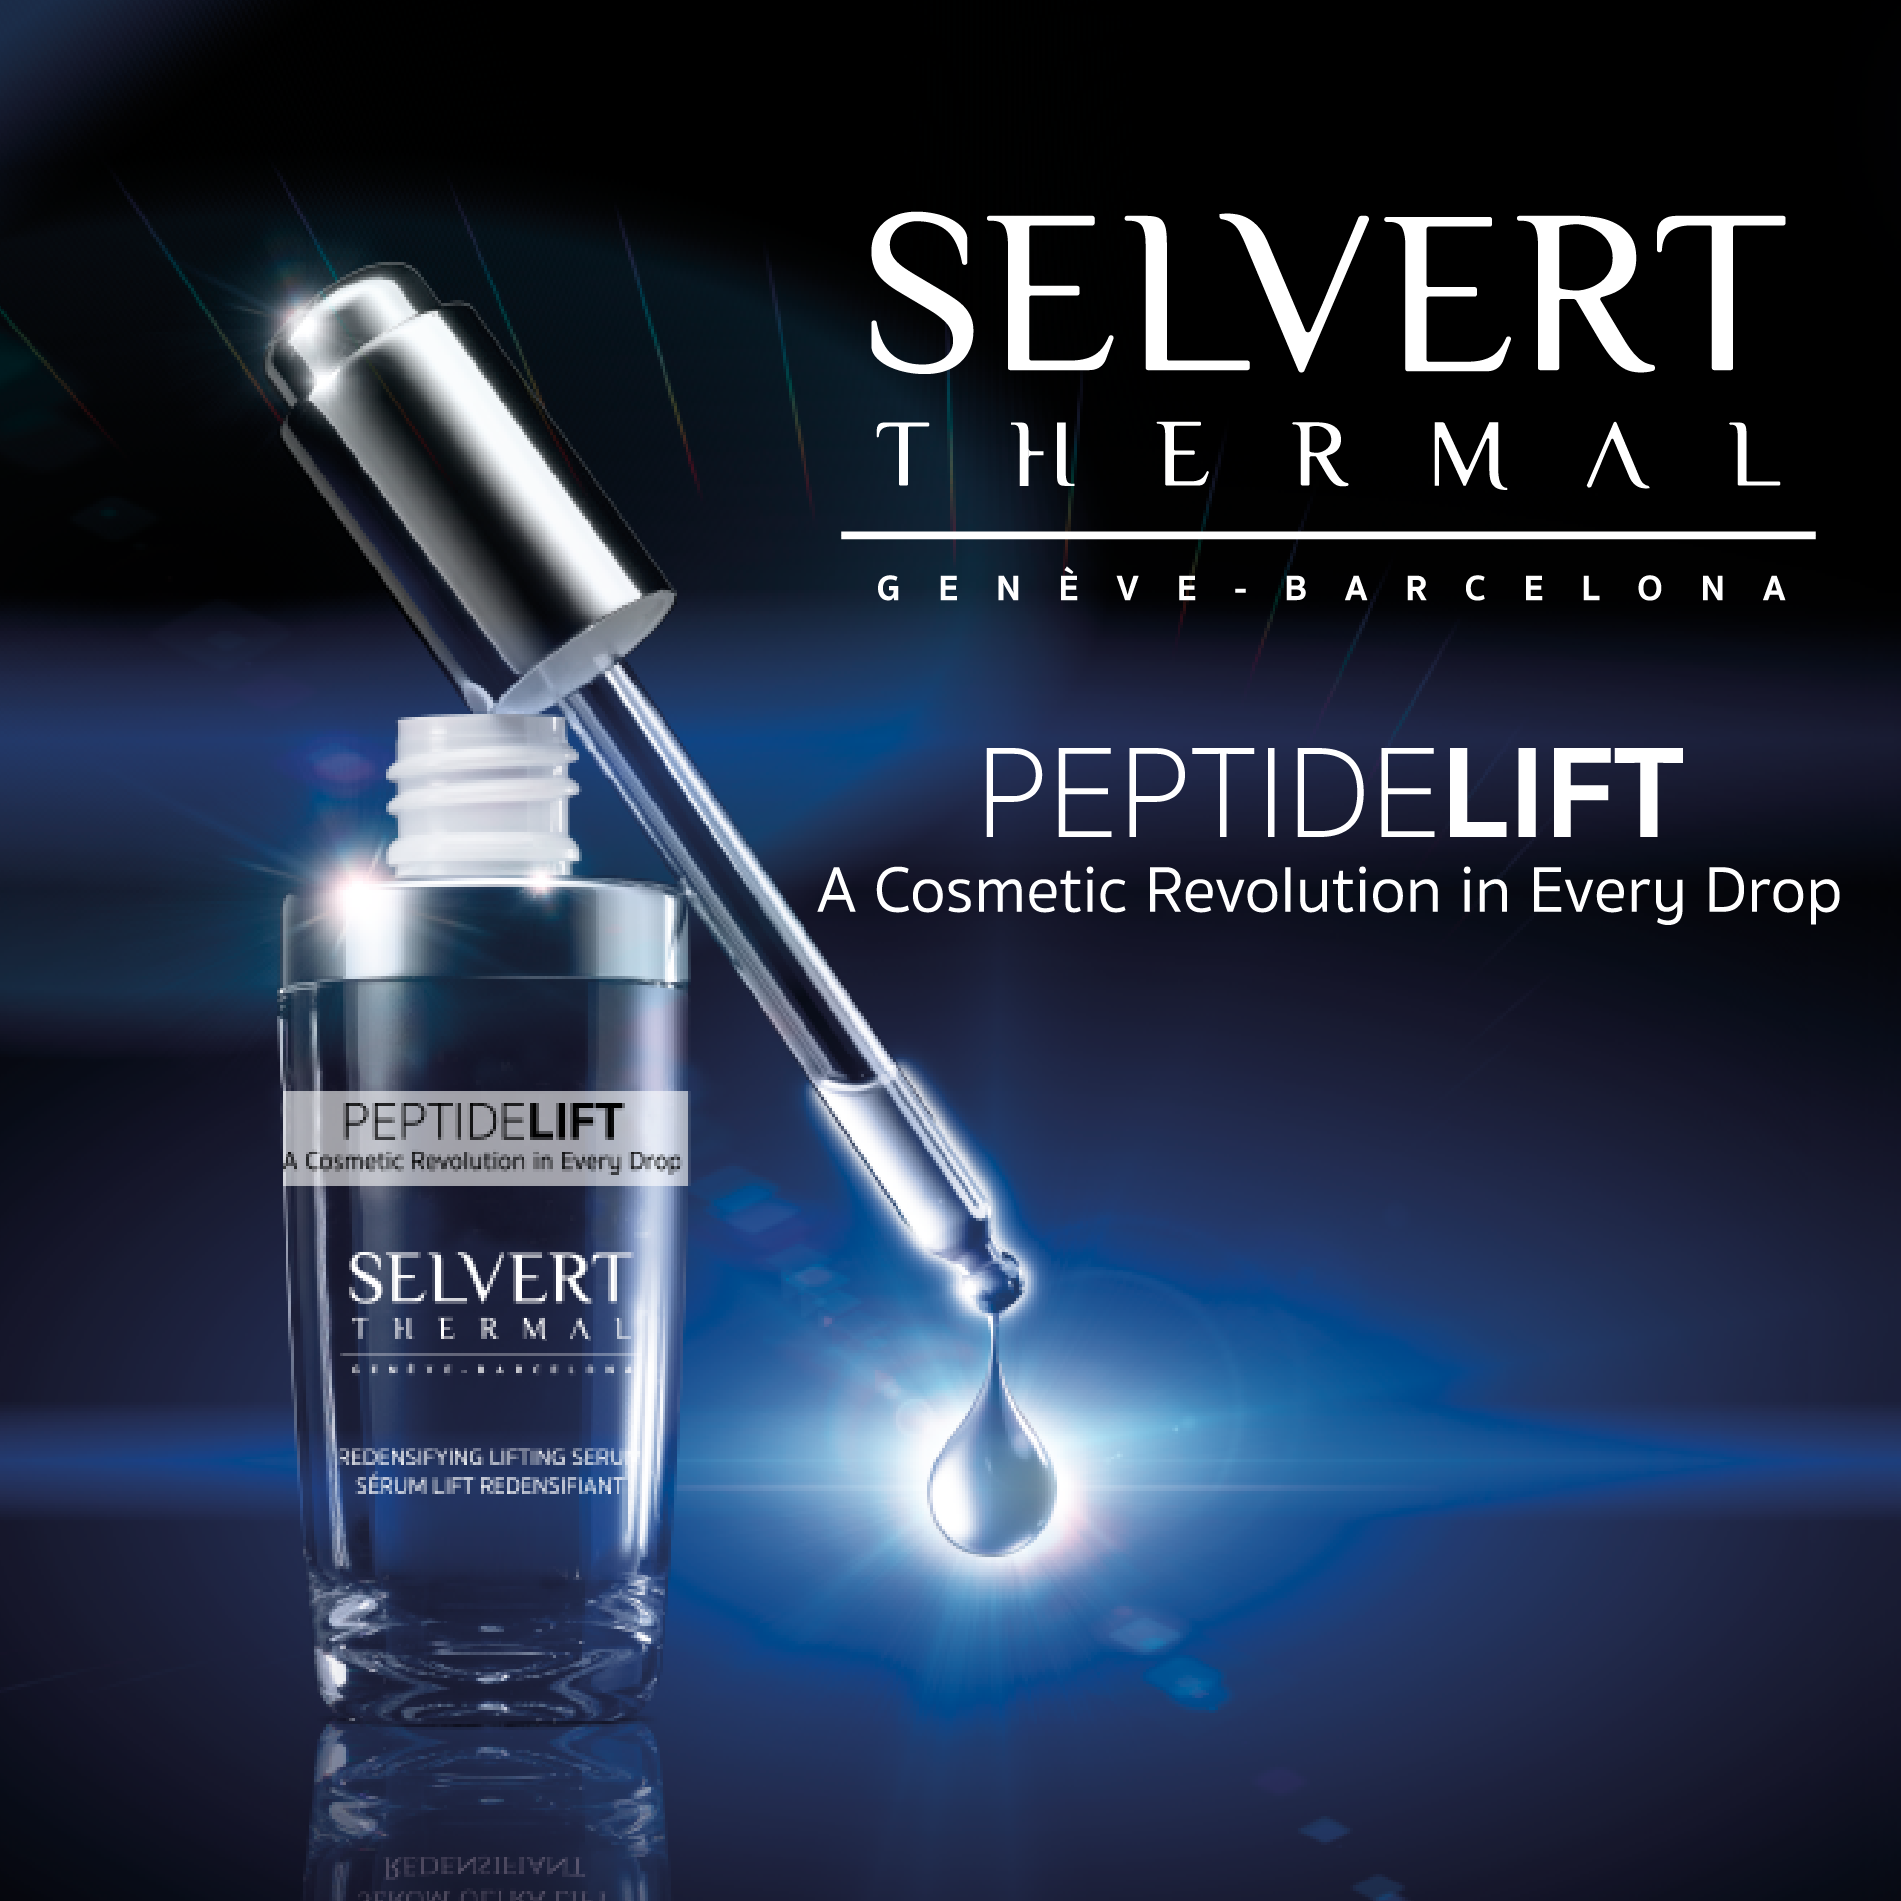 SELVERT THERMAL Peptide Lift